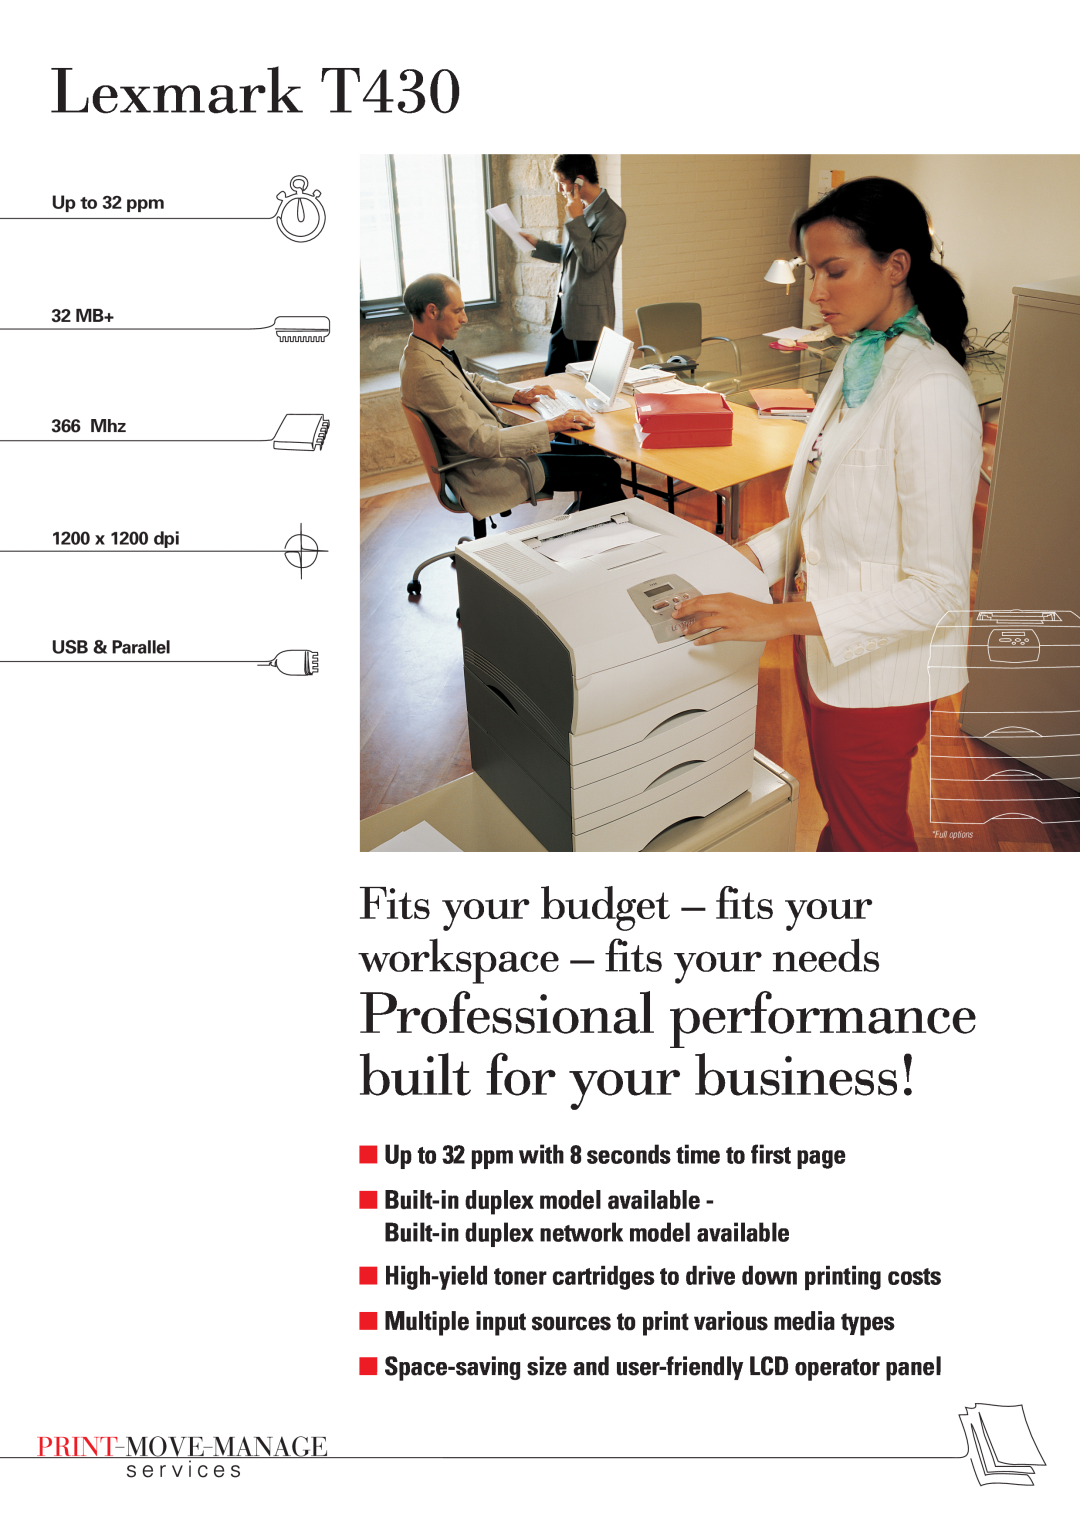 Lexmark manual Lexmark T430, Professional performance built for your business 